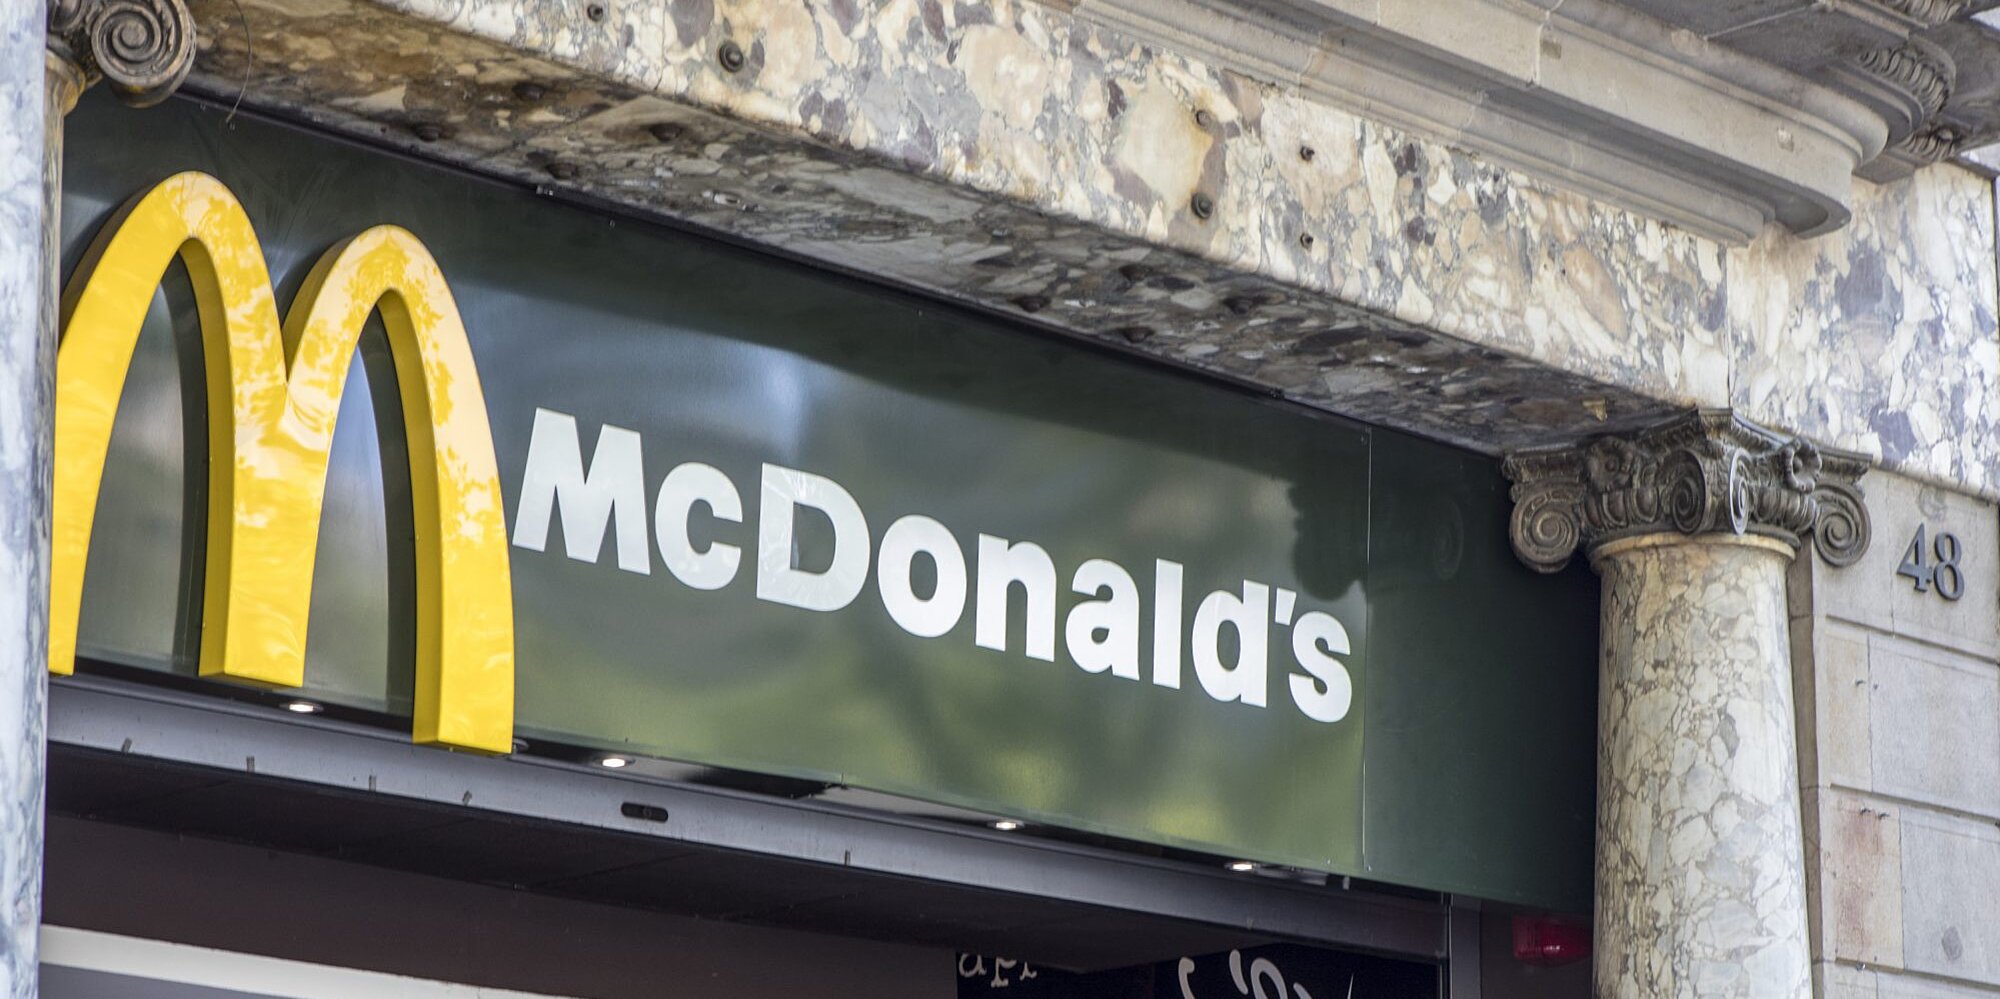 An Outbreak of Food Poisoning Has Been Linked to McDonald's Salads